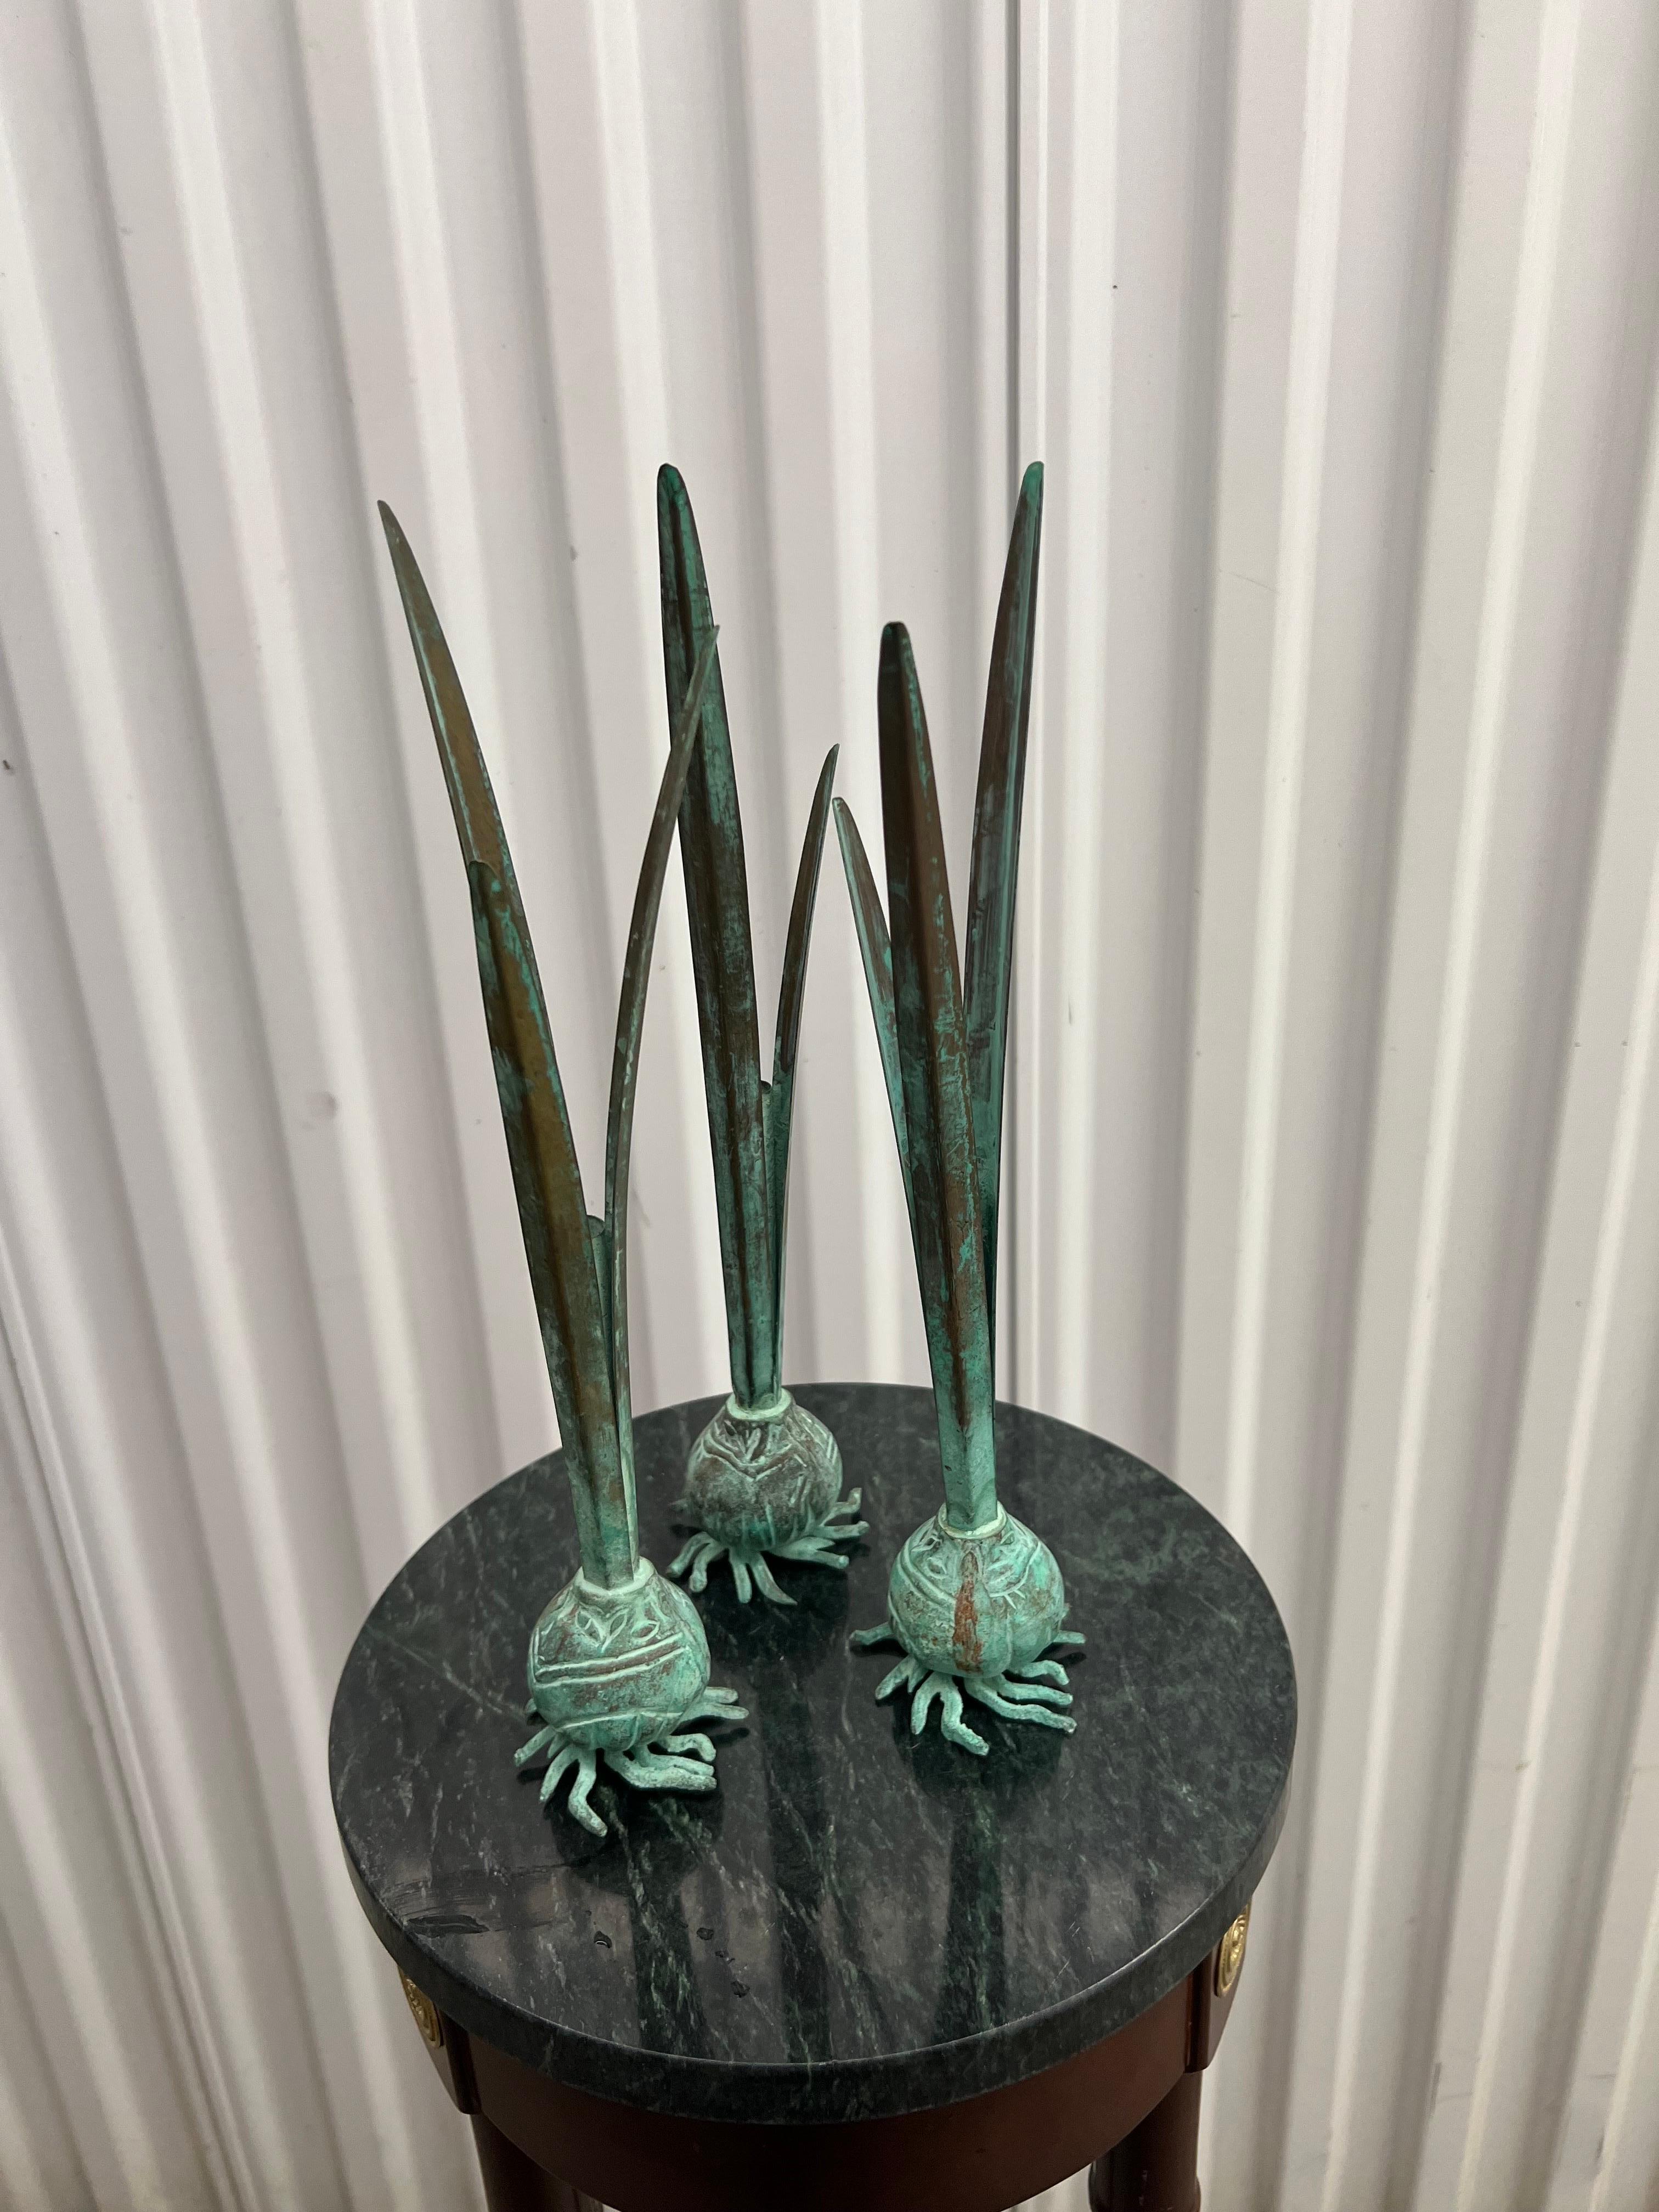 Vintage Postmodern figurative Italian Onion Flower Shaped Metal Candleholders from Carnevale, 1980s, in Very Good conditions. Designed 1980 to 1989 I have official proof of authenticity such as vintage catalogs,designer records, or other literature